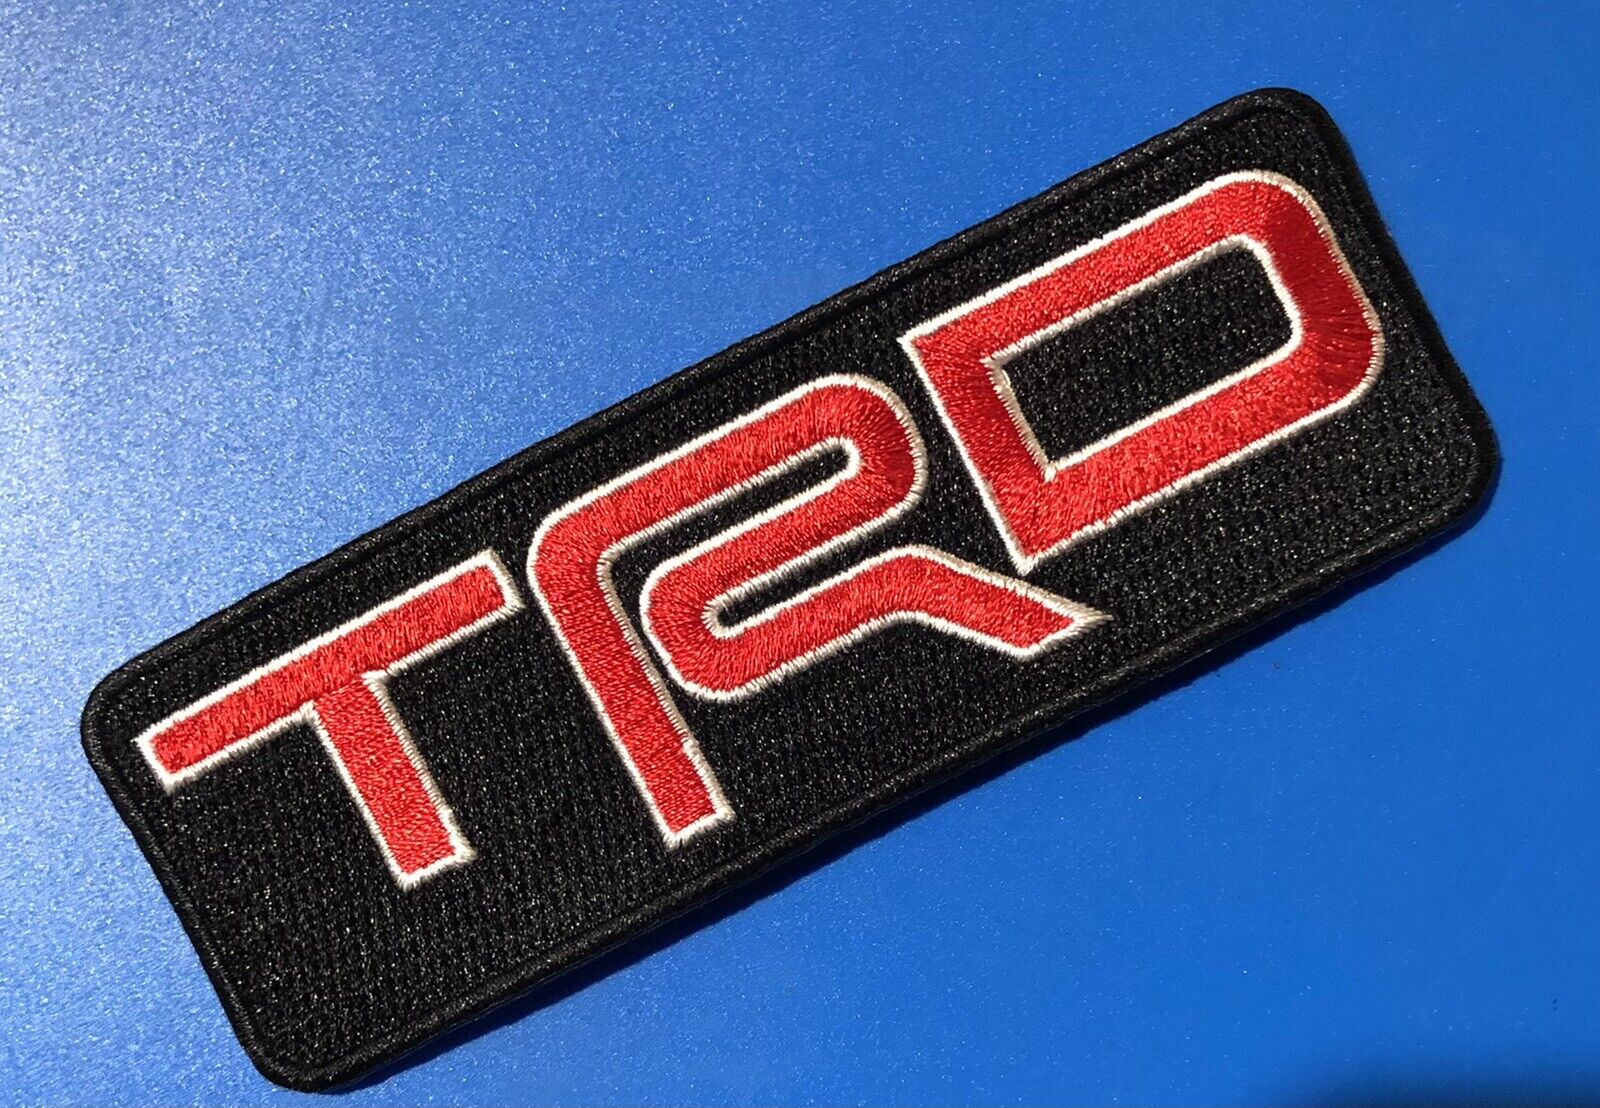 TRD Toyota Racing Development Iron On Patch.       5”x1.75” Red w/ Outline